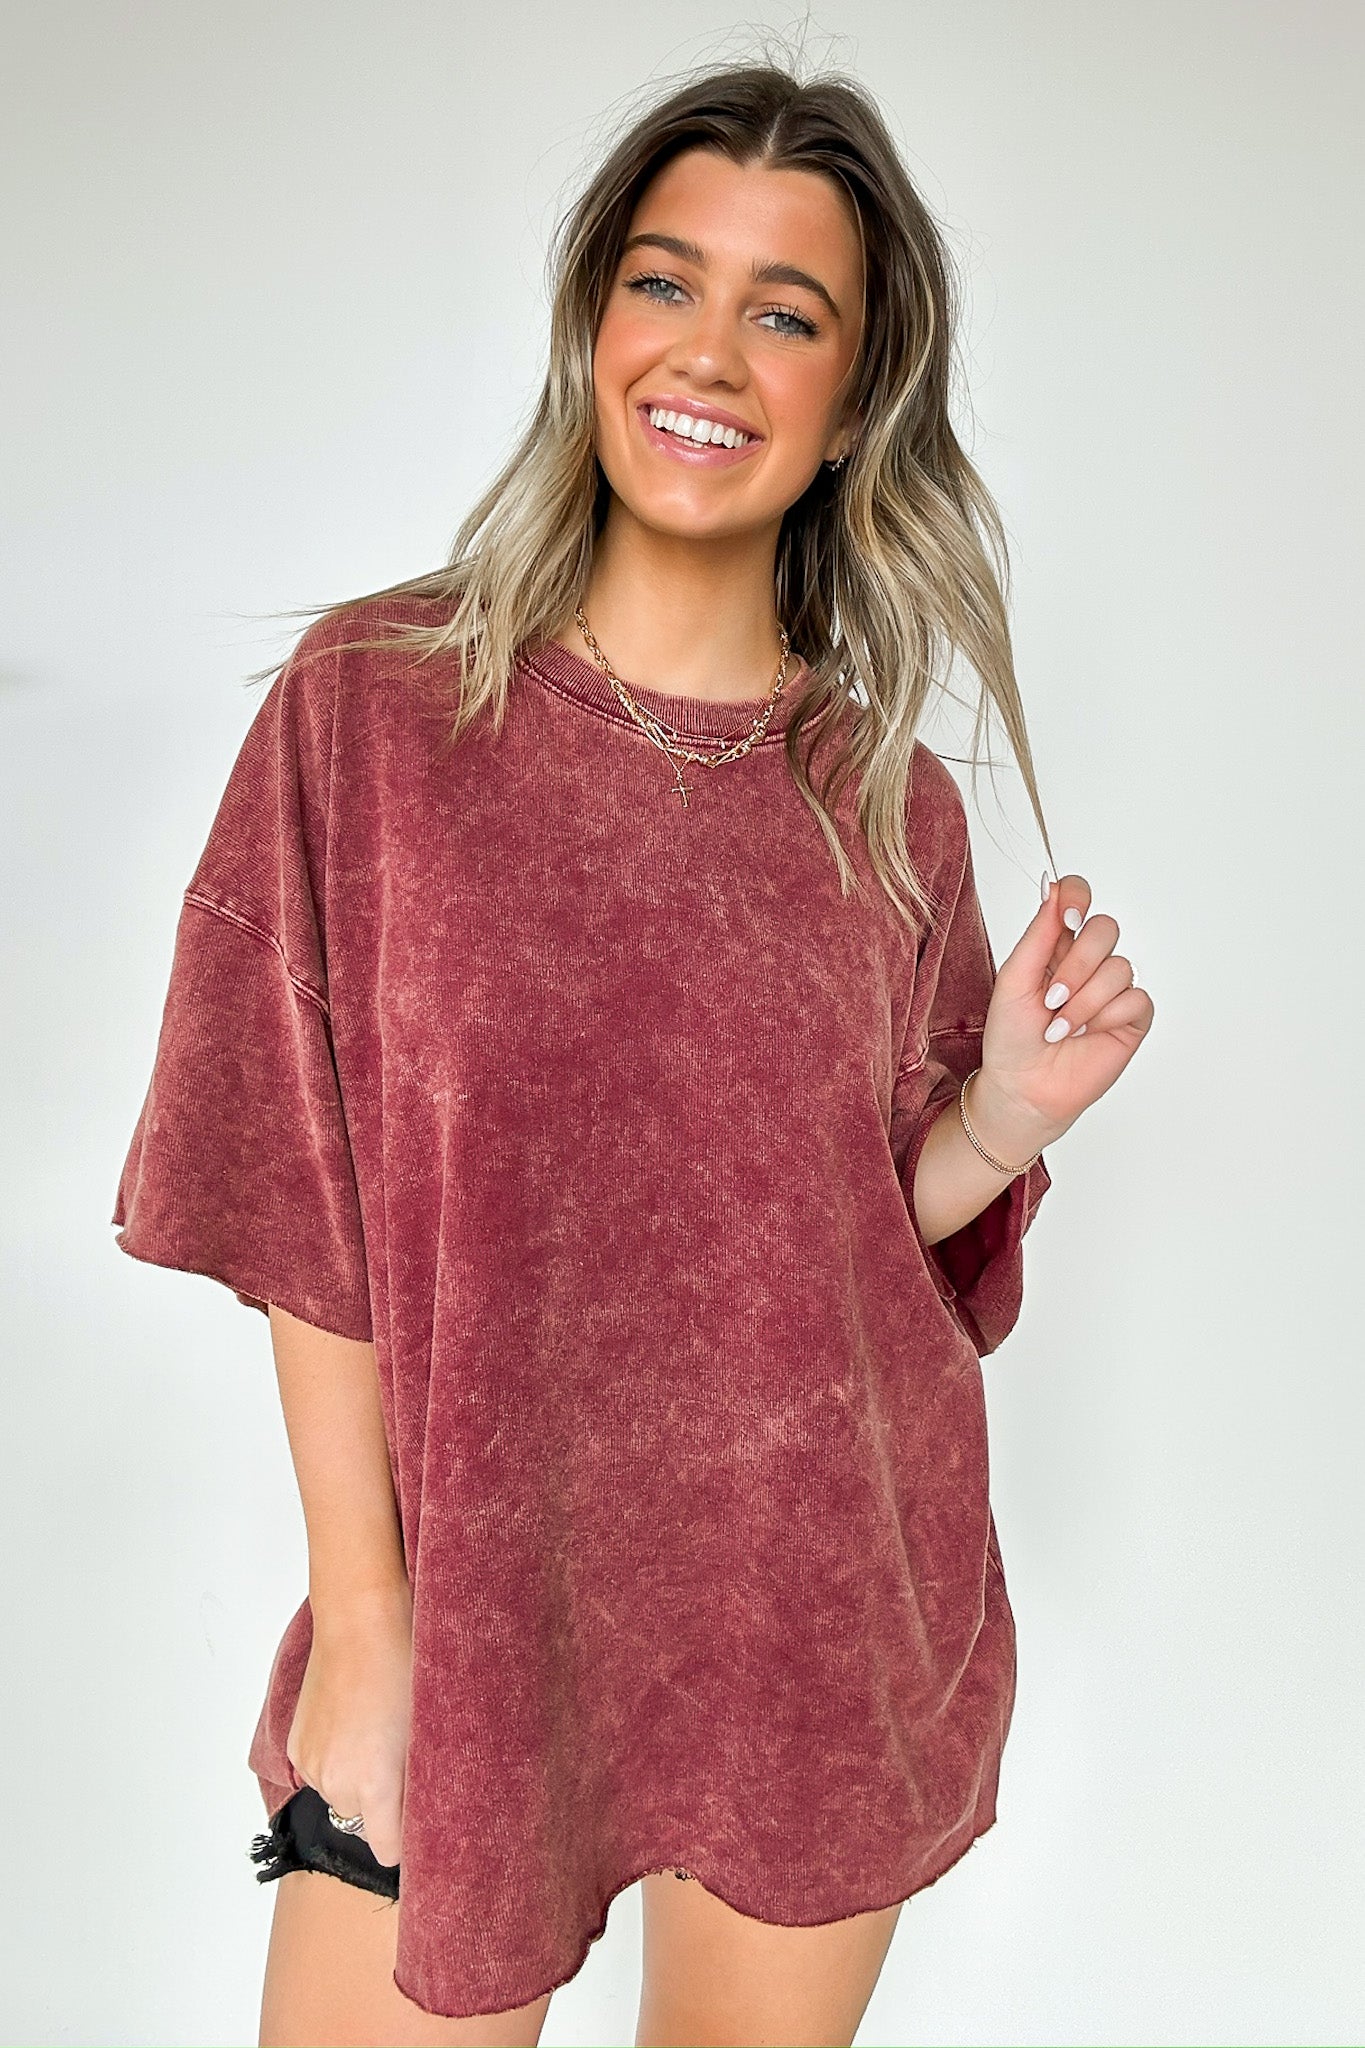 Cabernet / SM Drifting Dreams Acid Wash Relaxed Fit Top - BACK IN STOCK - Madison and Mallory